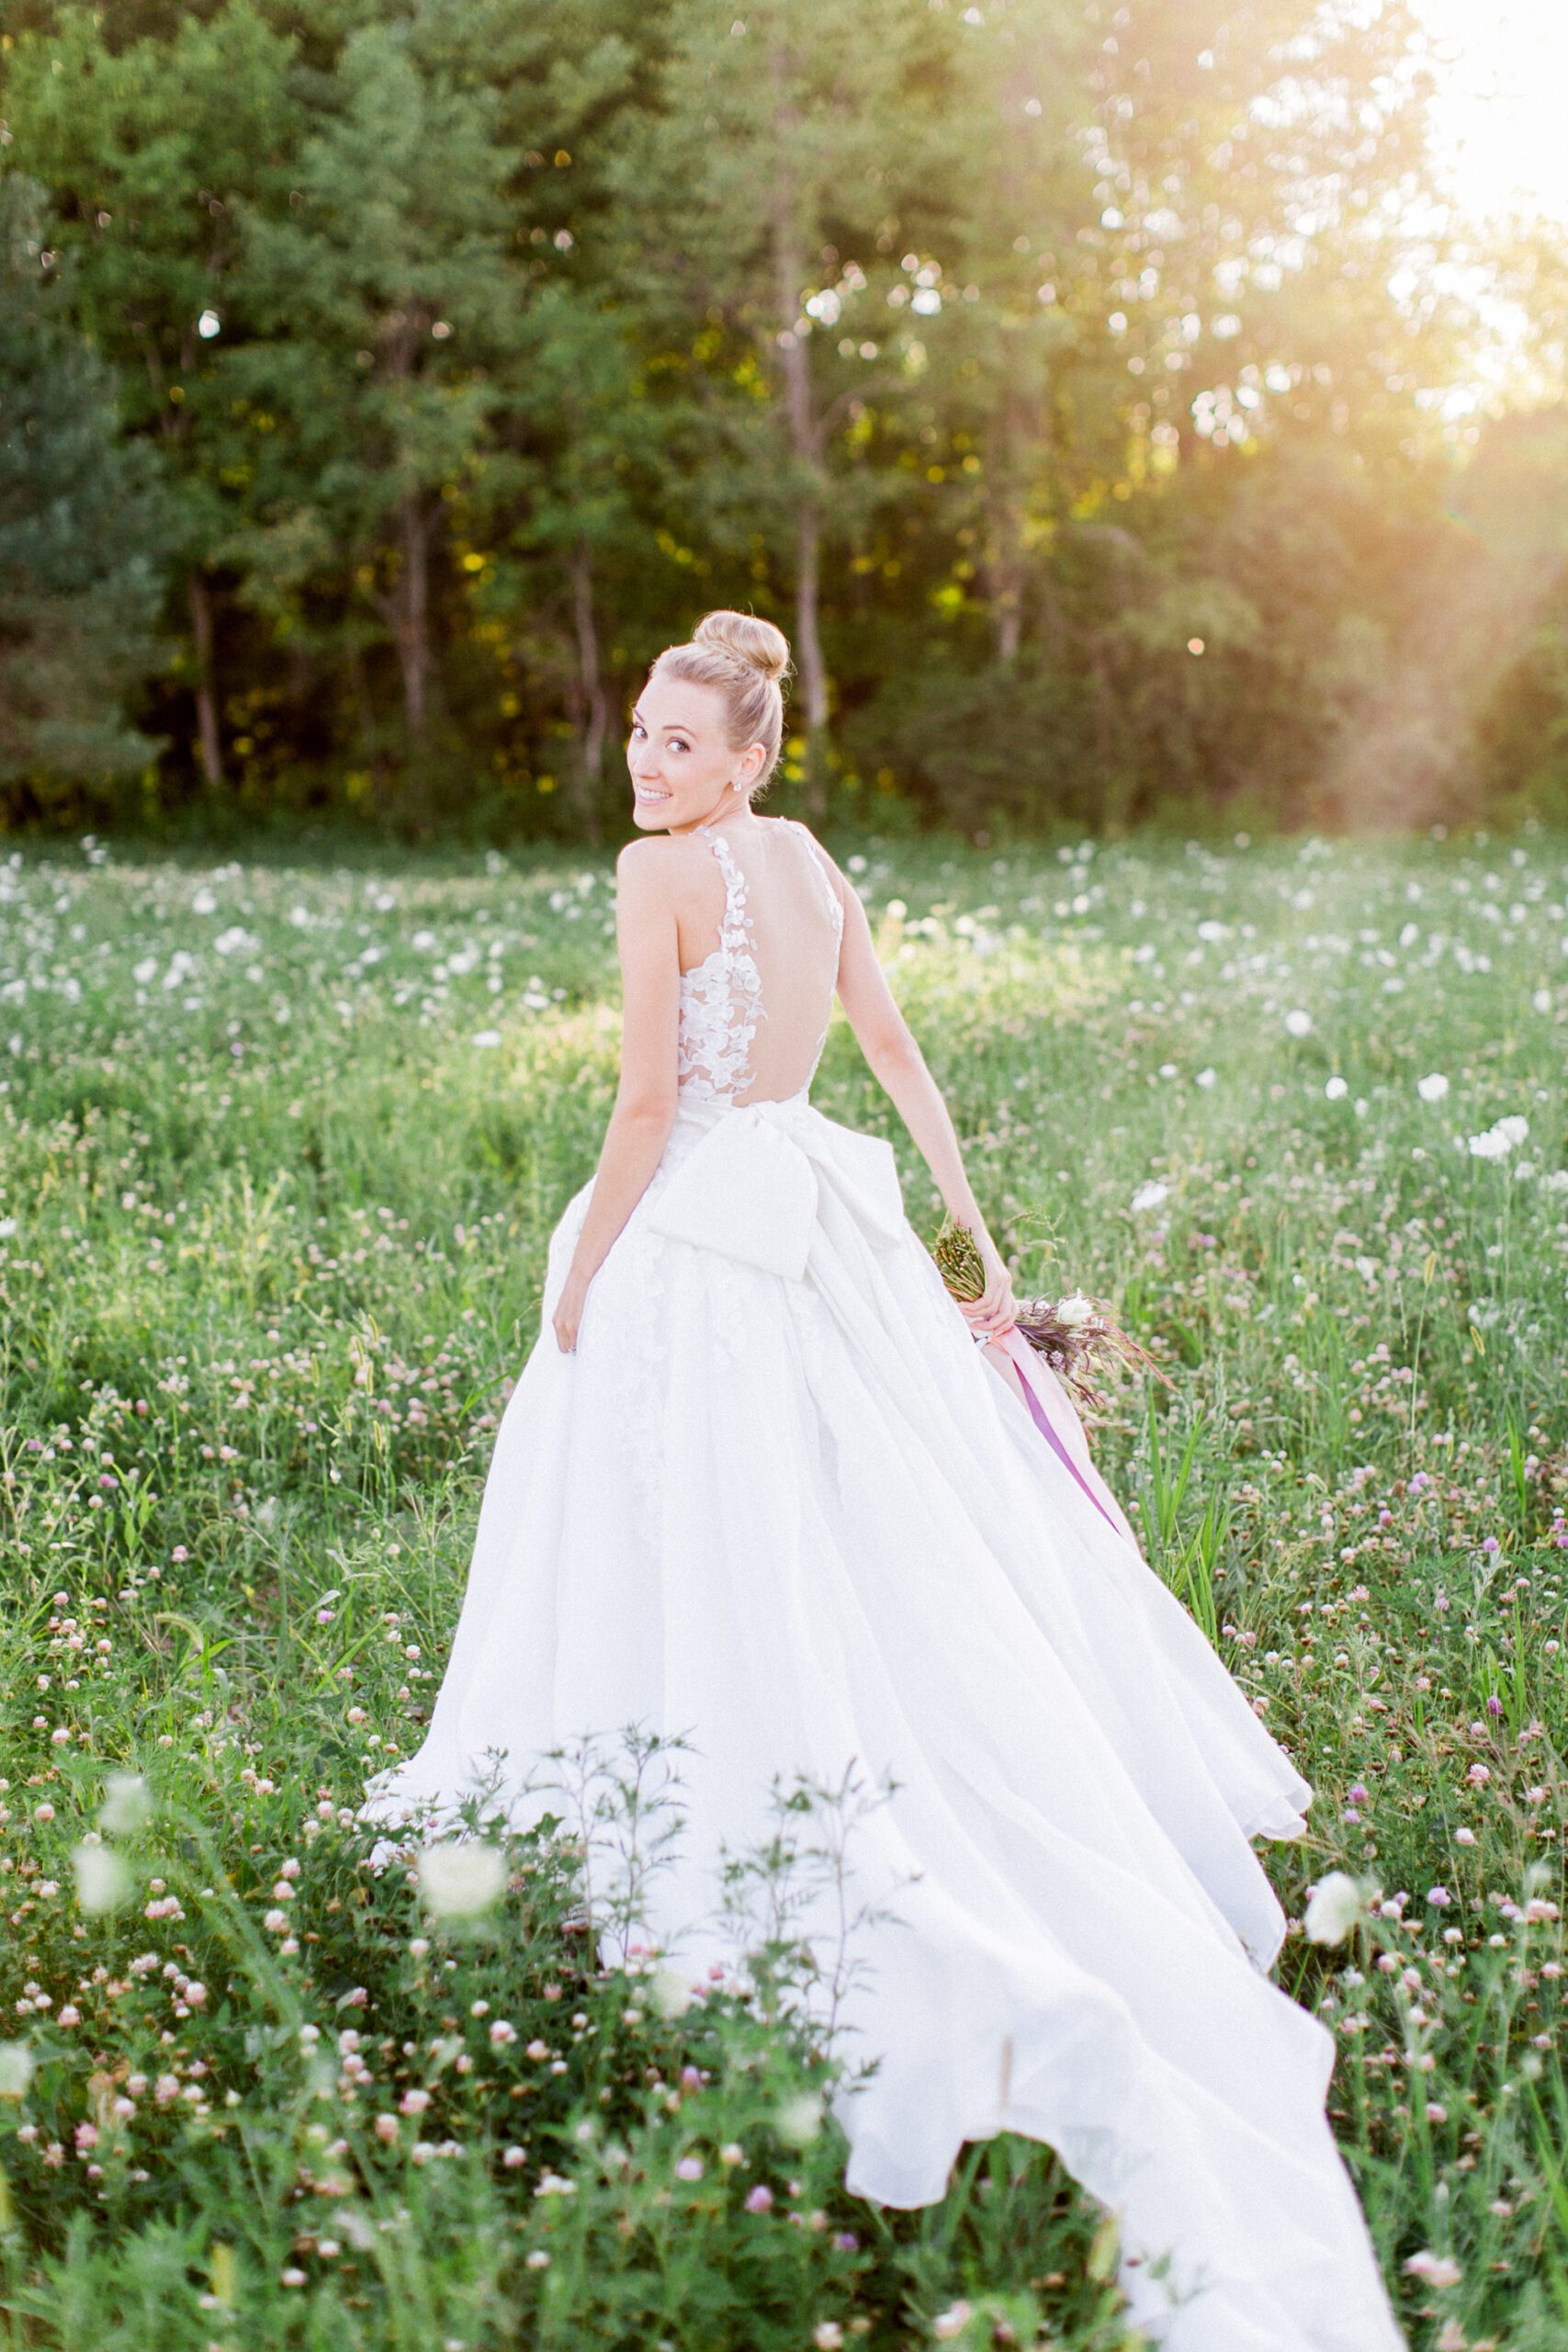 A bride walks through a field of wild flowers for wedding photography